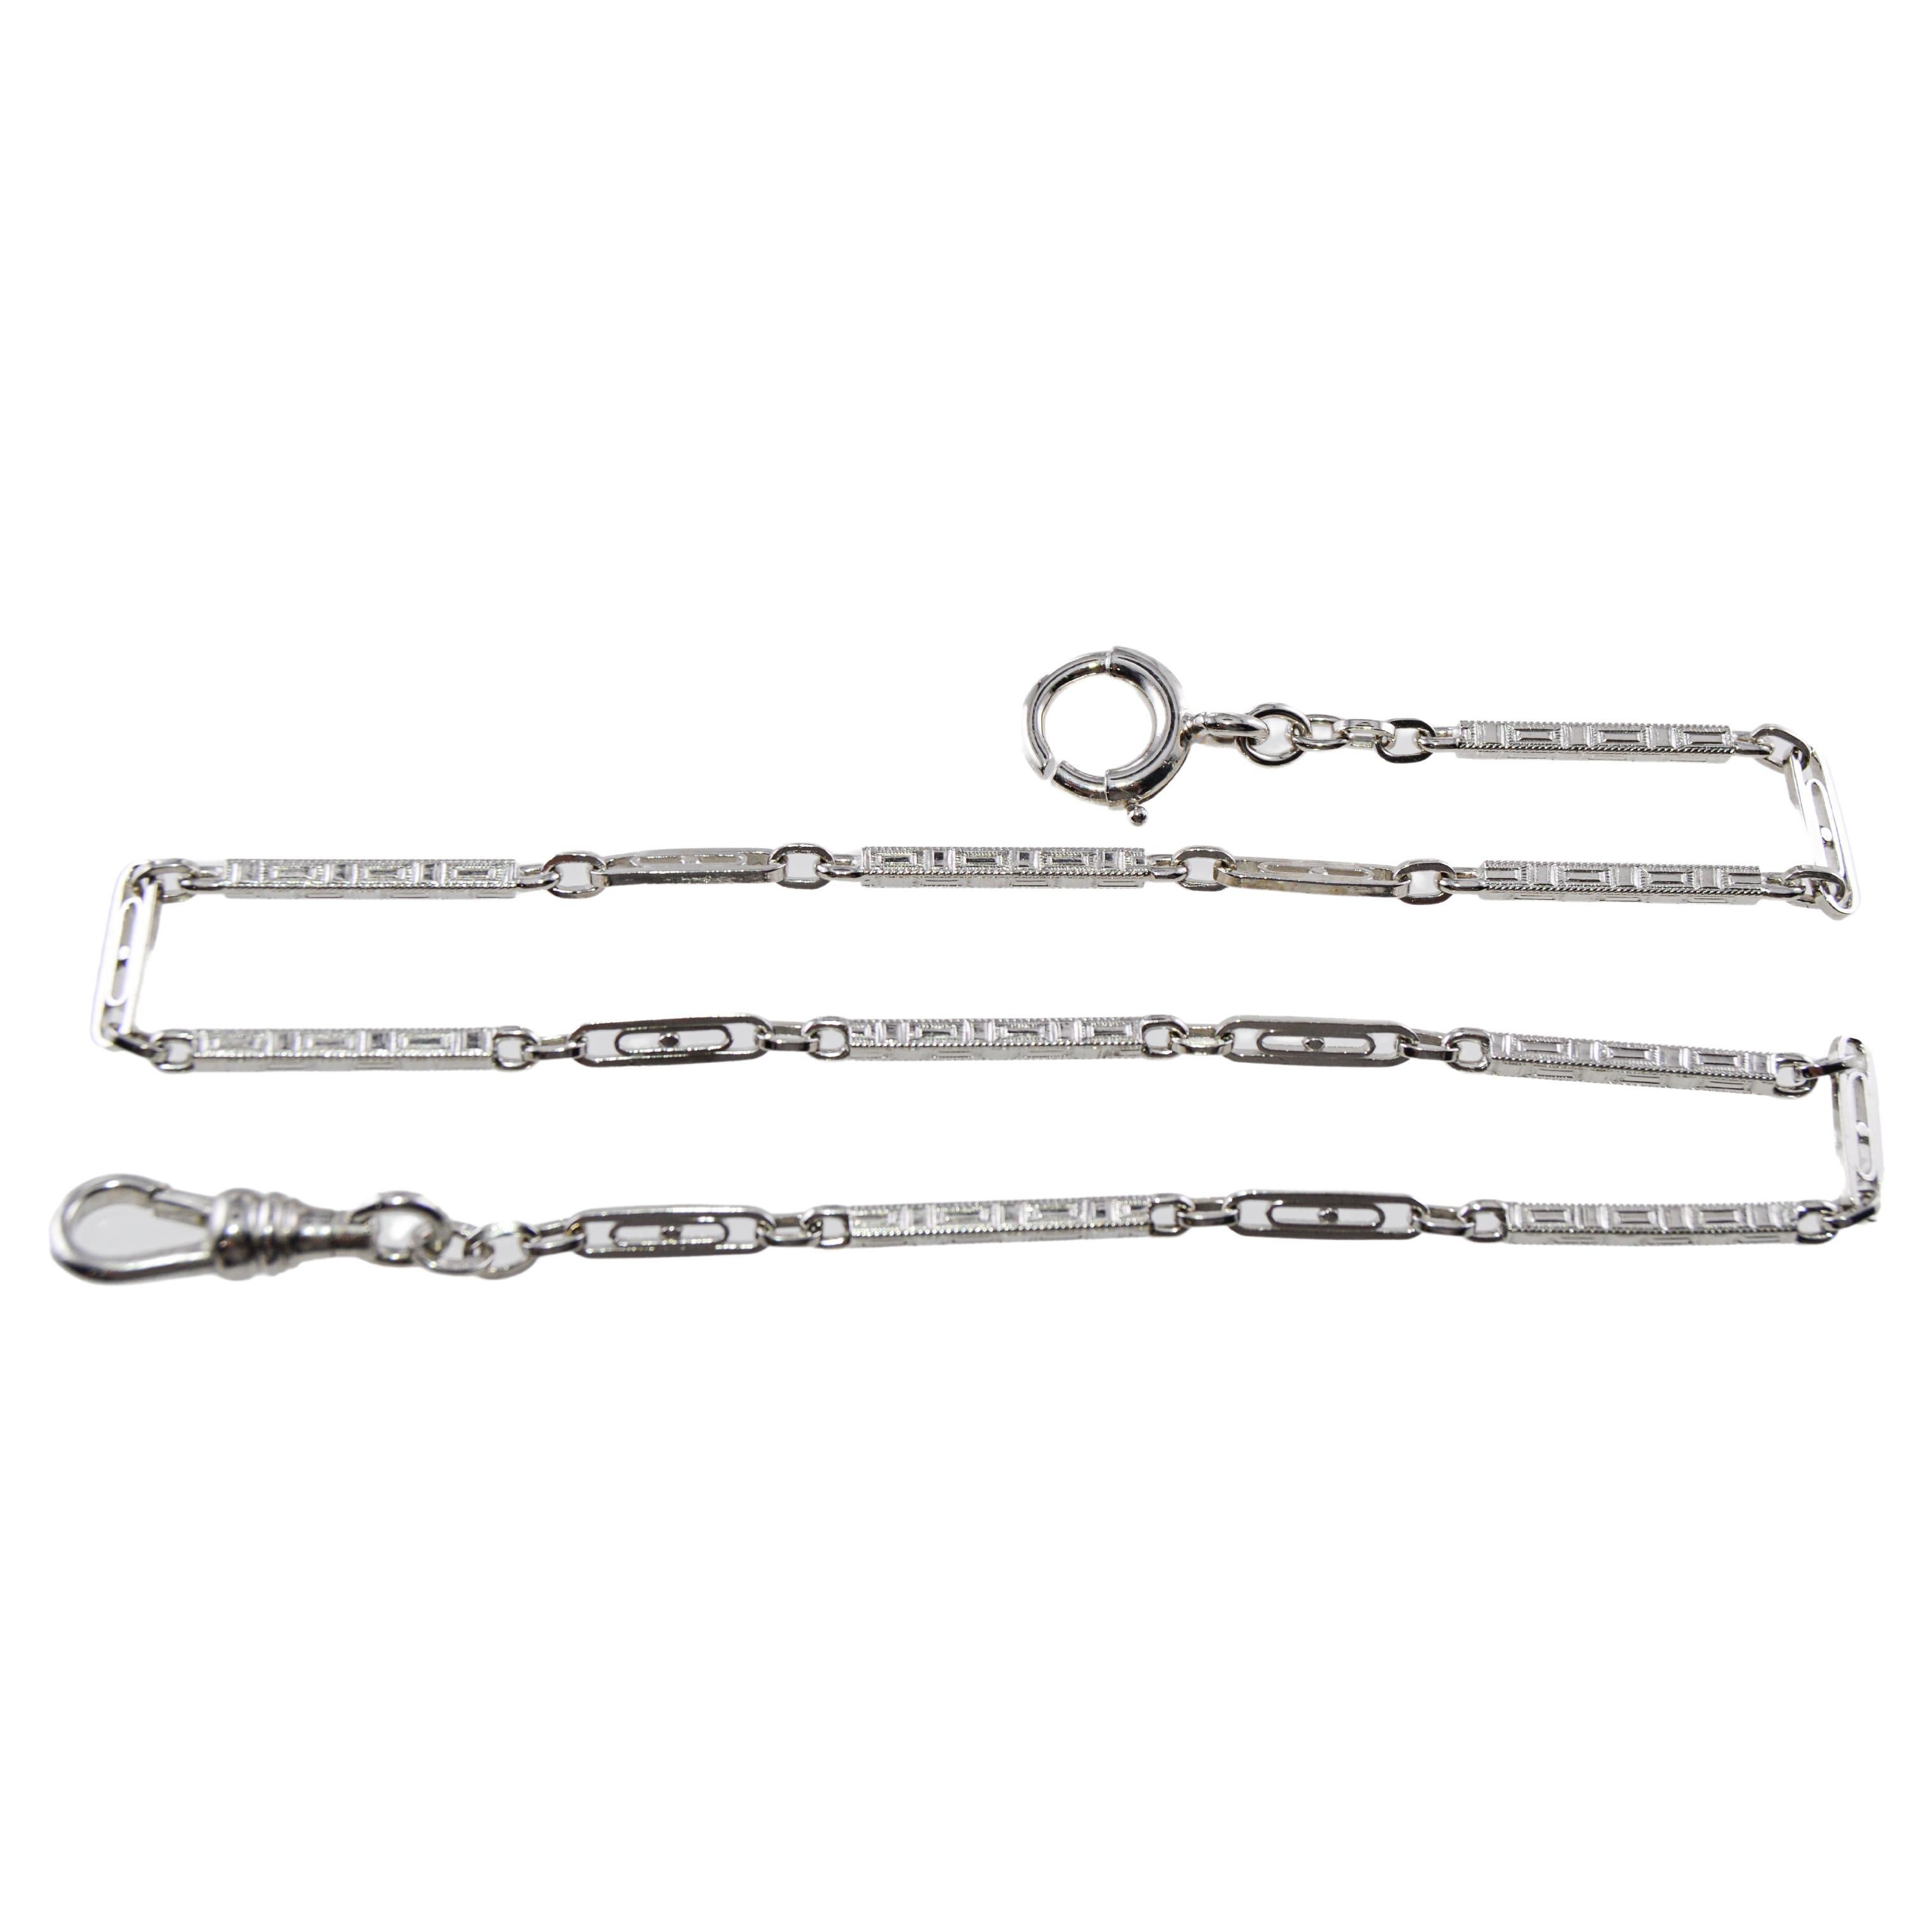 14Kt White Gold Necklace, Bracelet or Pocket Watch Chain circa 1920's / 30's For Sale